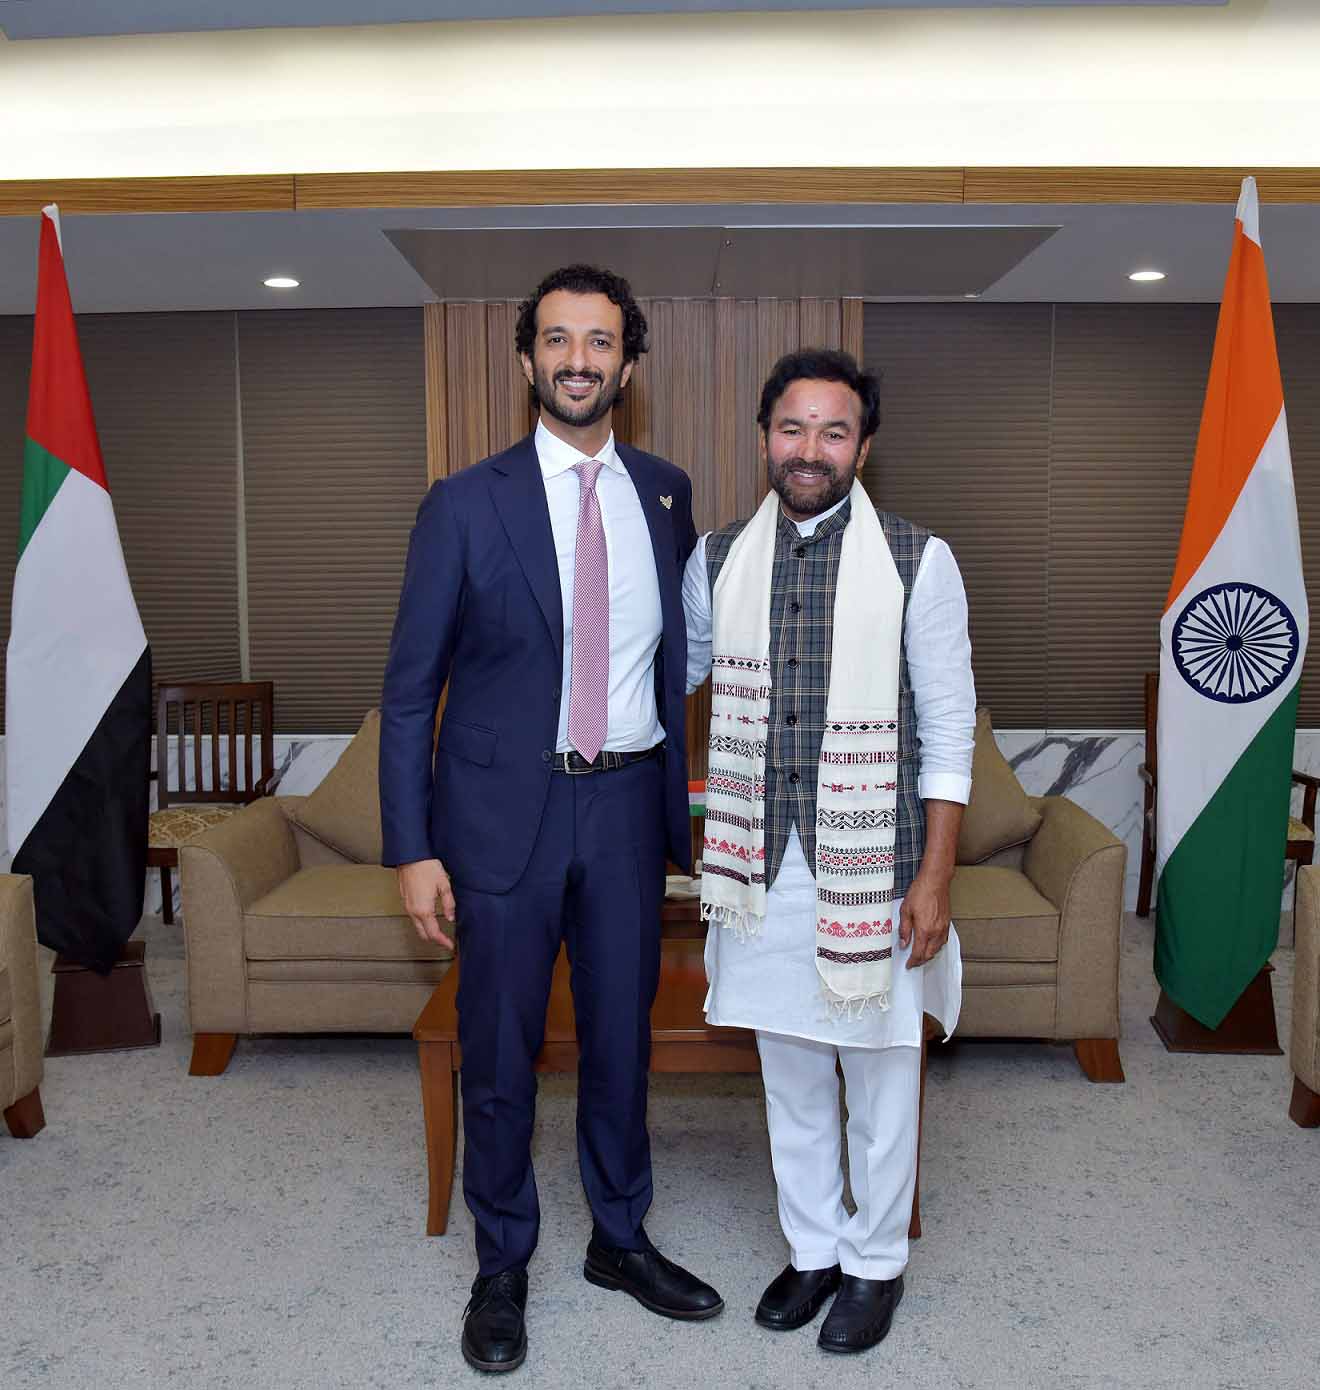 UAE And India Explore Investment Opportunities In New Economy And Tourism Sectors – UAE Today Blog